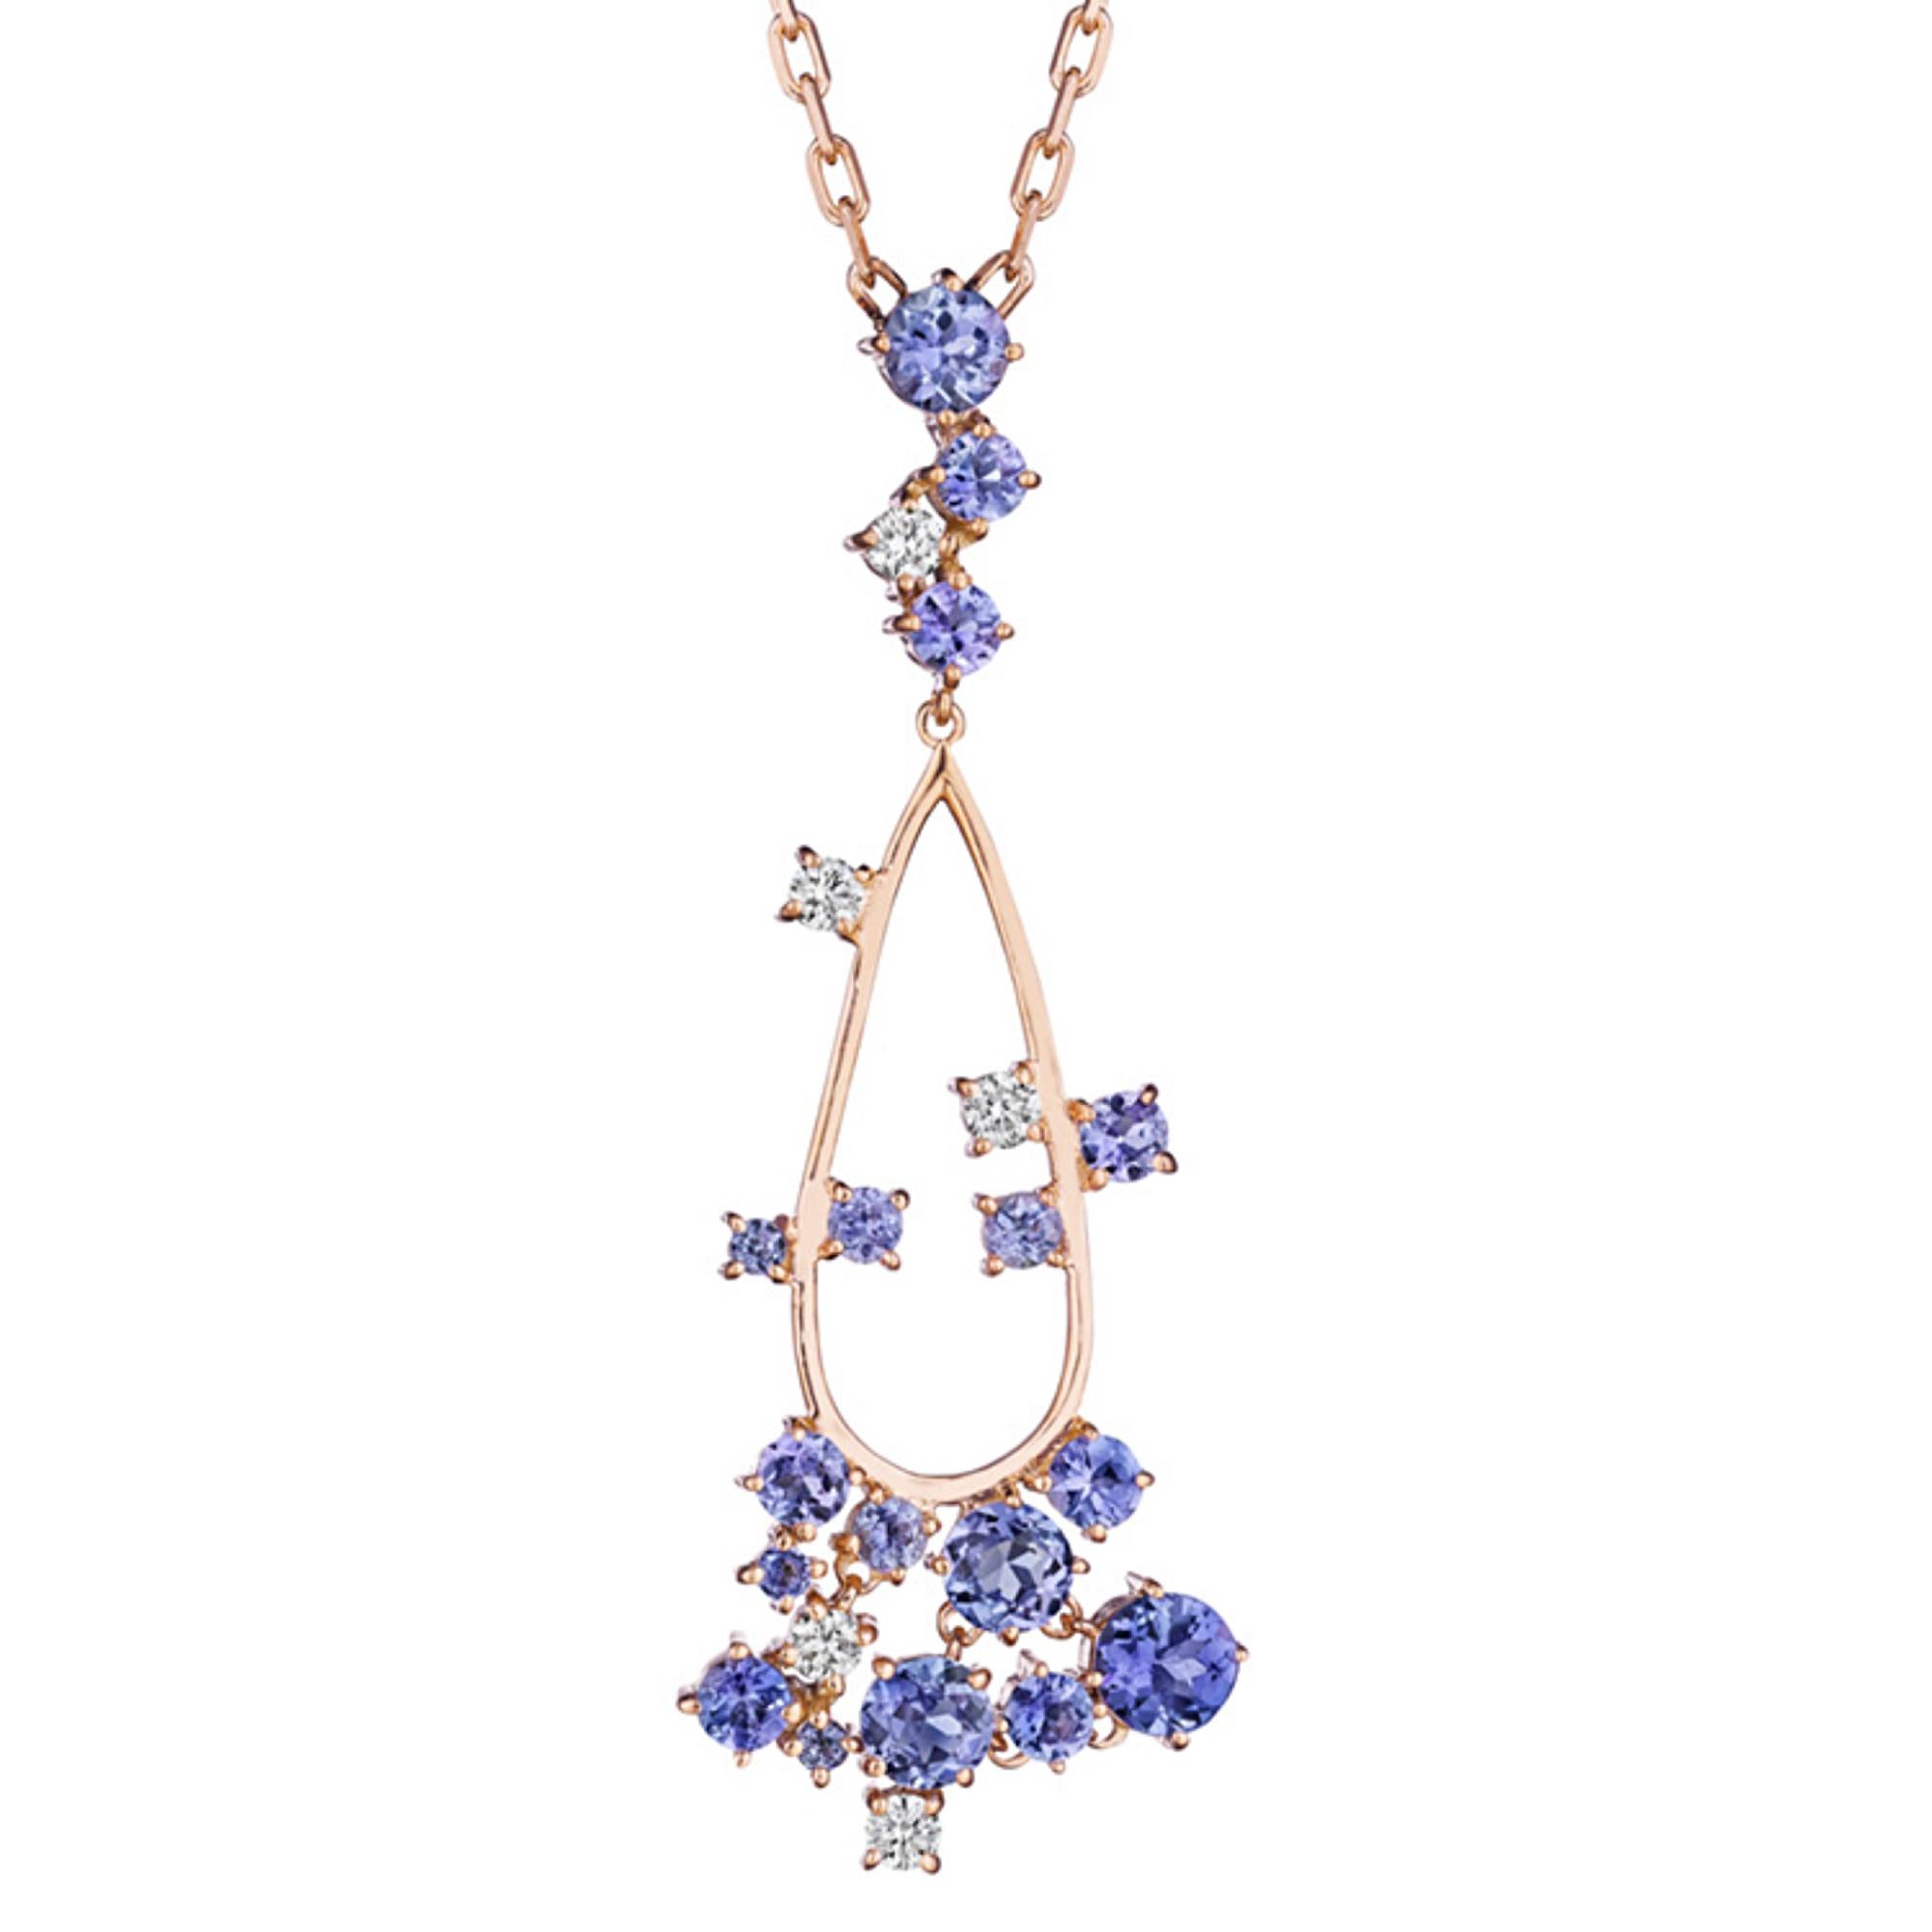 Specs: 18k yellow gold necklace with 1.25 carats of tanzanite and 0.15 carats of white diamond. 

Story: The Melting Ice collection by MadStone designer Kerri Halpern draws influence from its colorful gemstones creating playful designs.